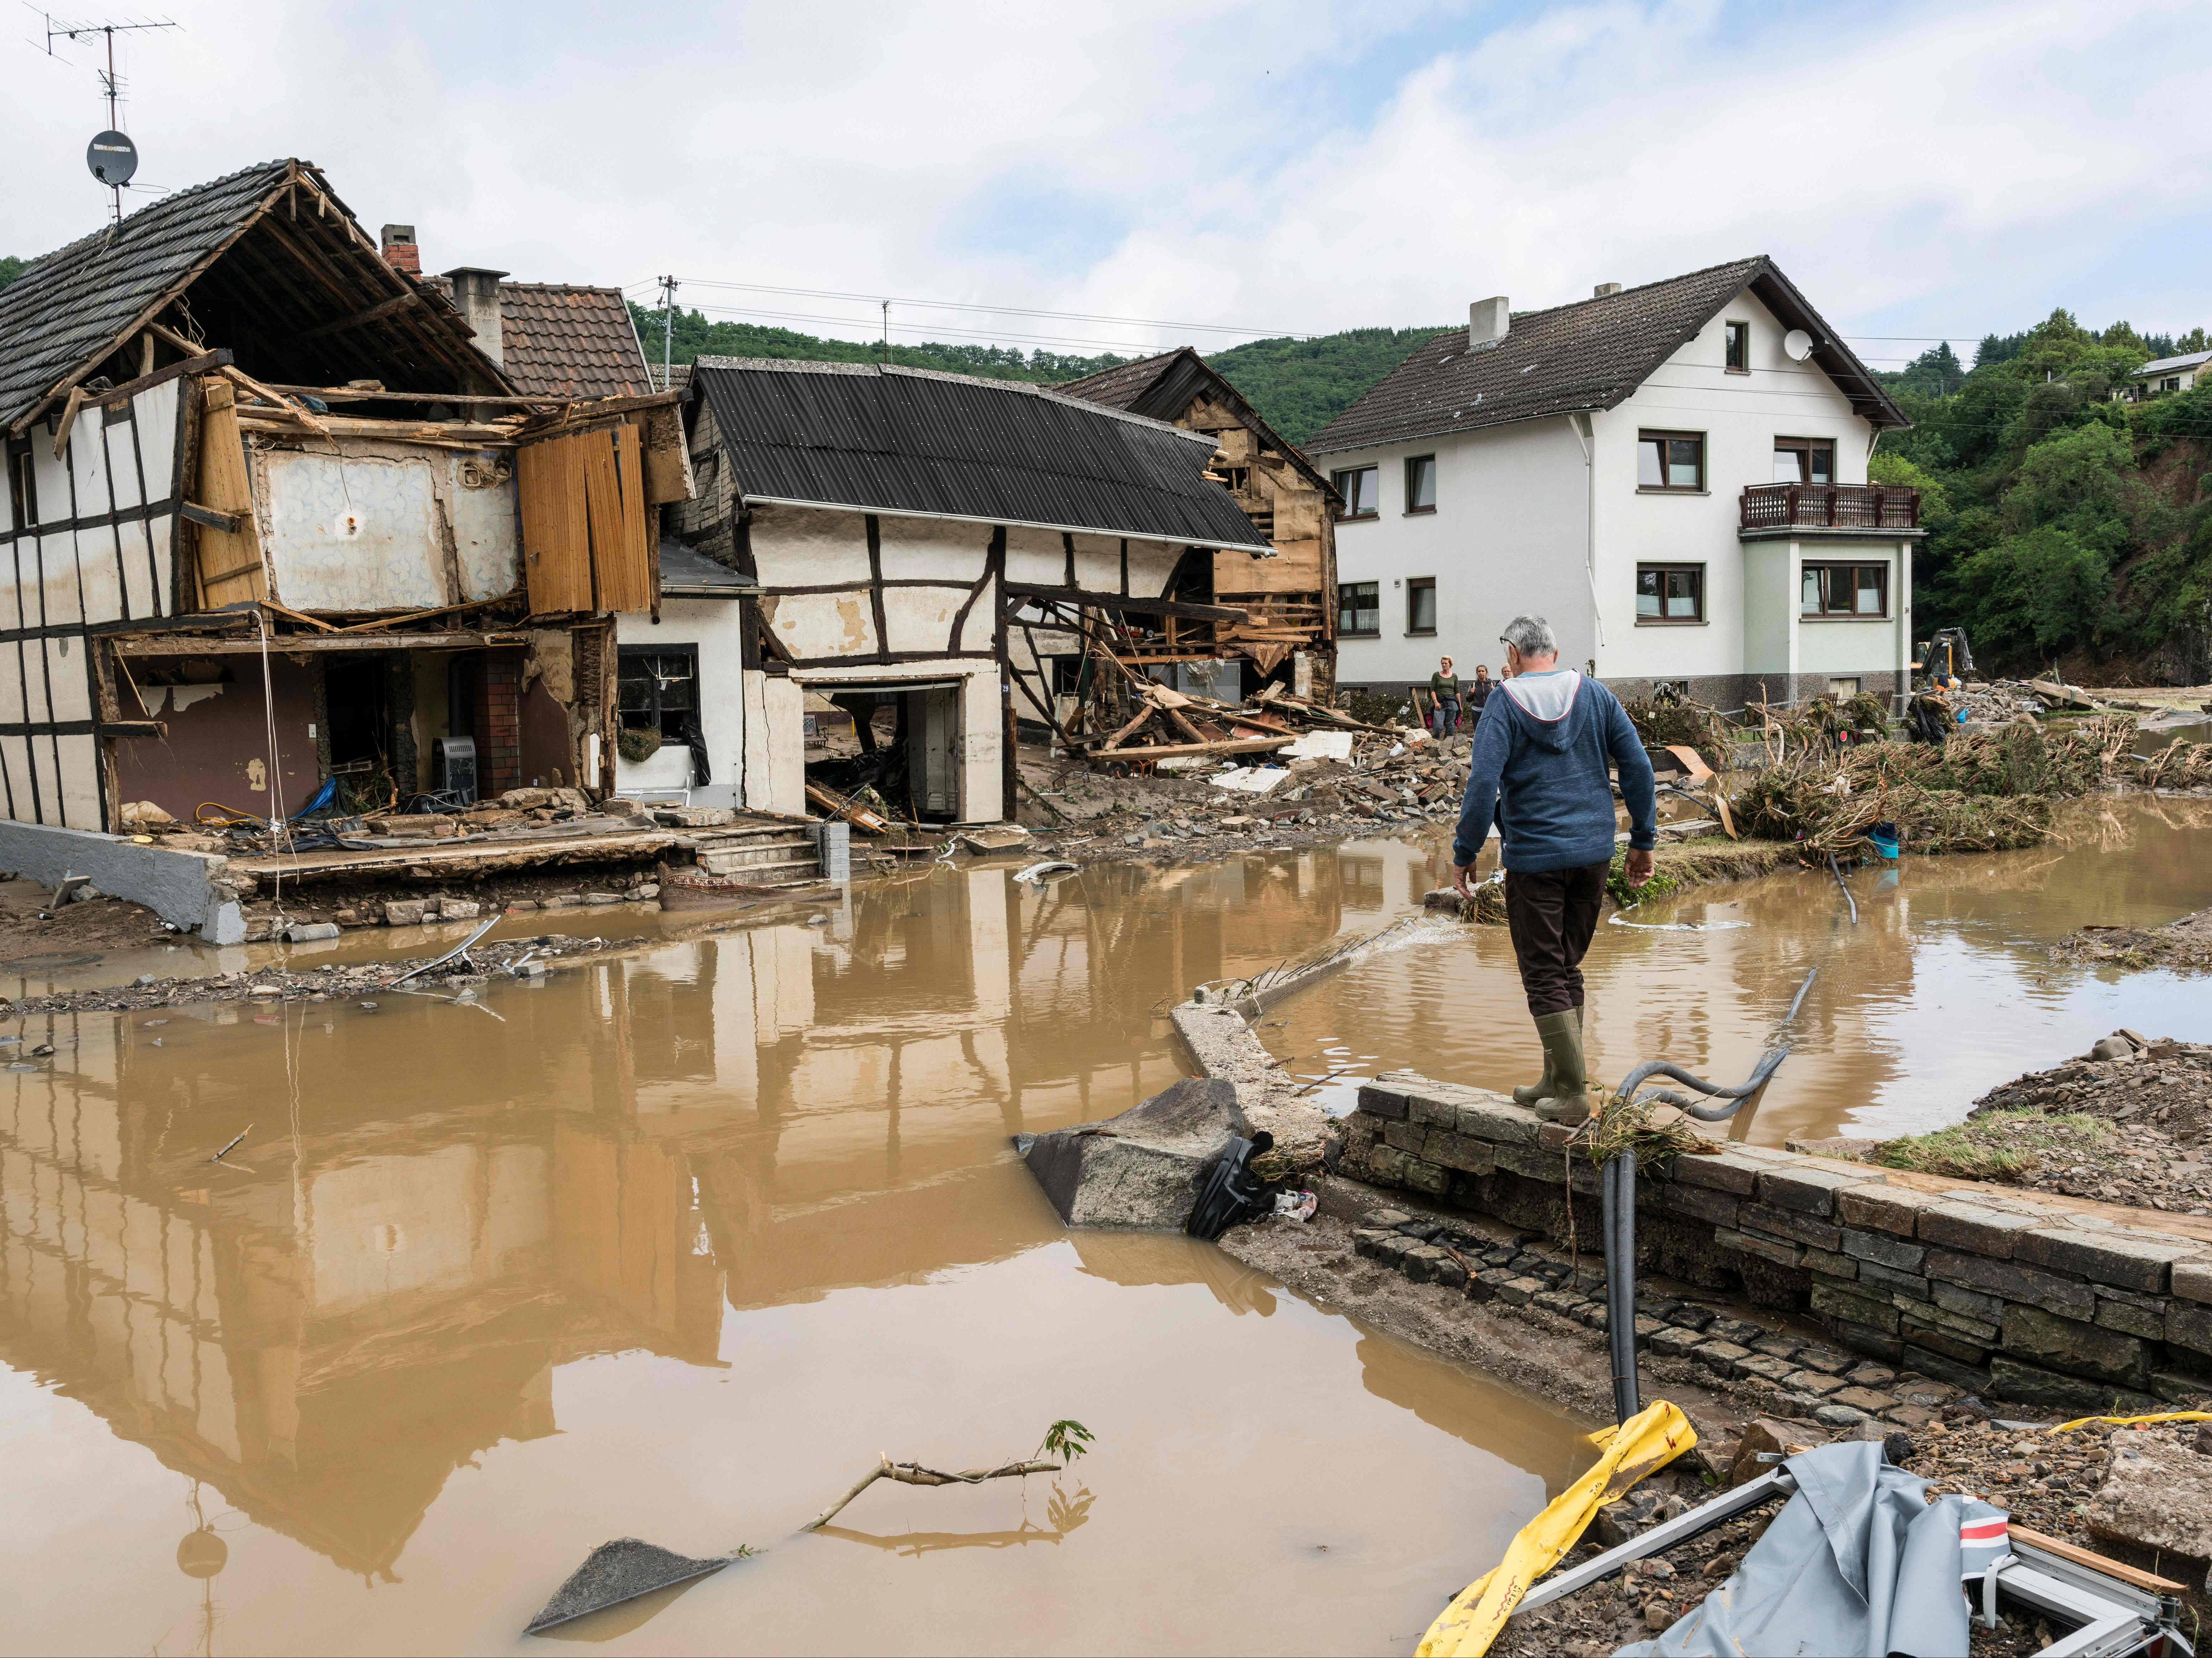 A man walks through the floods towards destroyed houses in Schuld near Bad Neuenahr, western Germany, on July 15, 2021